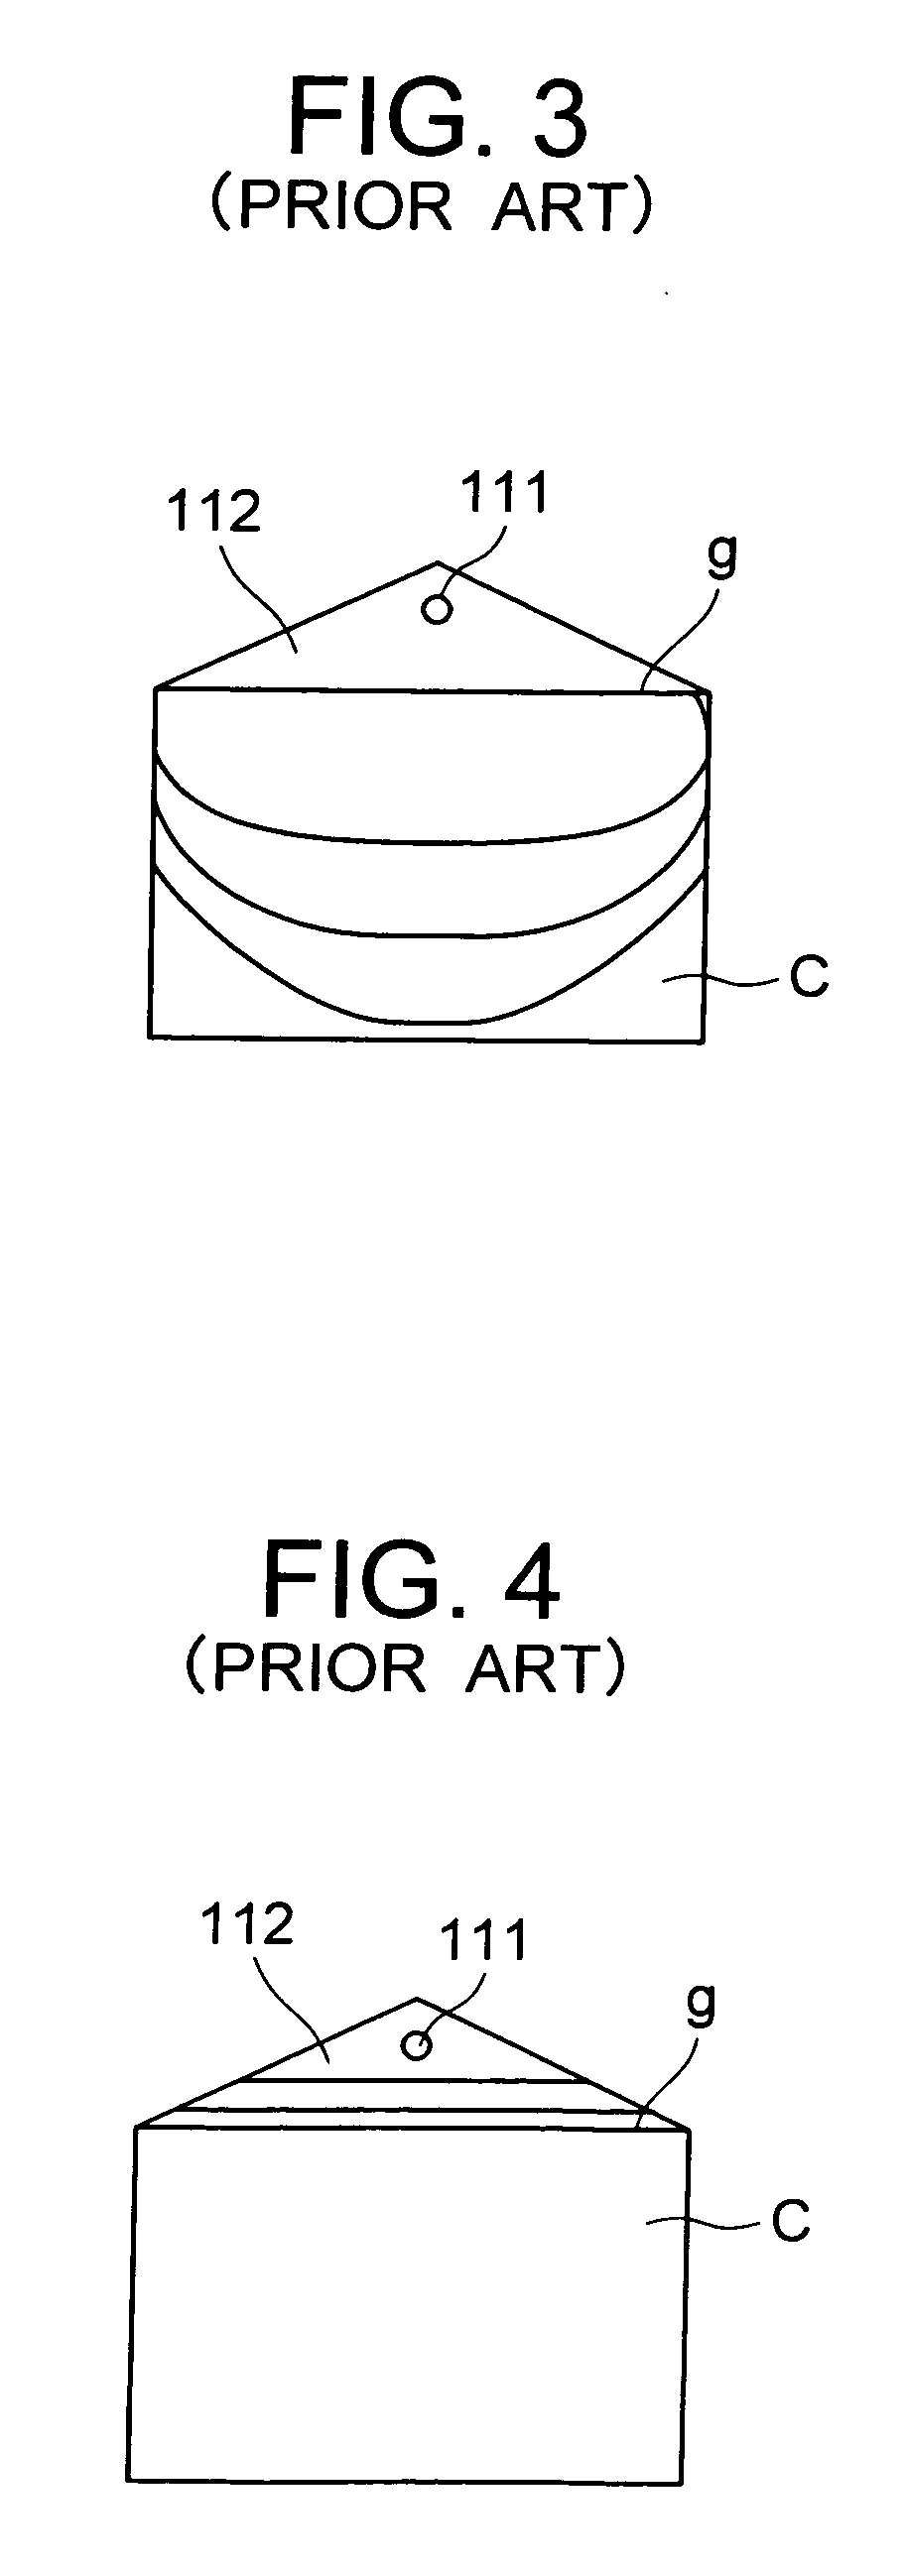 Injection control apparatus